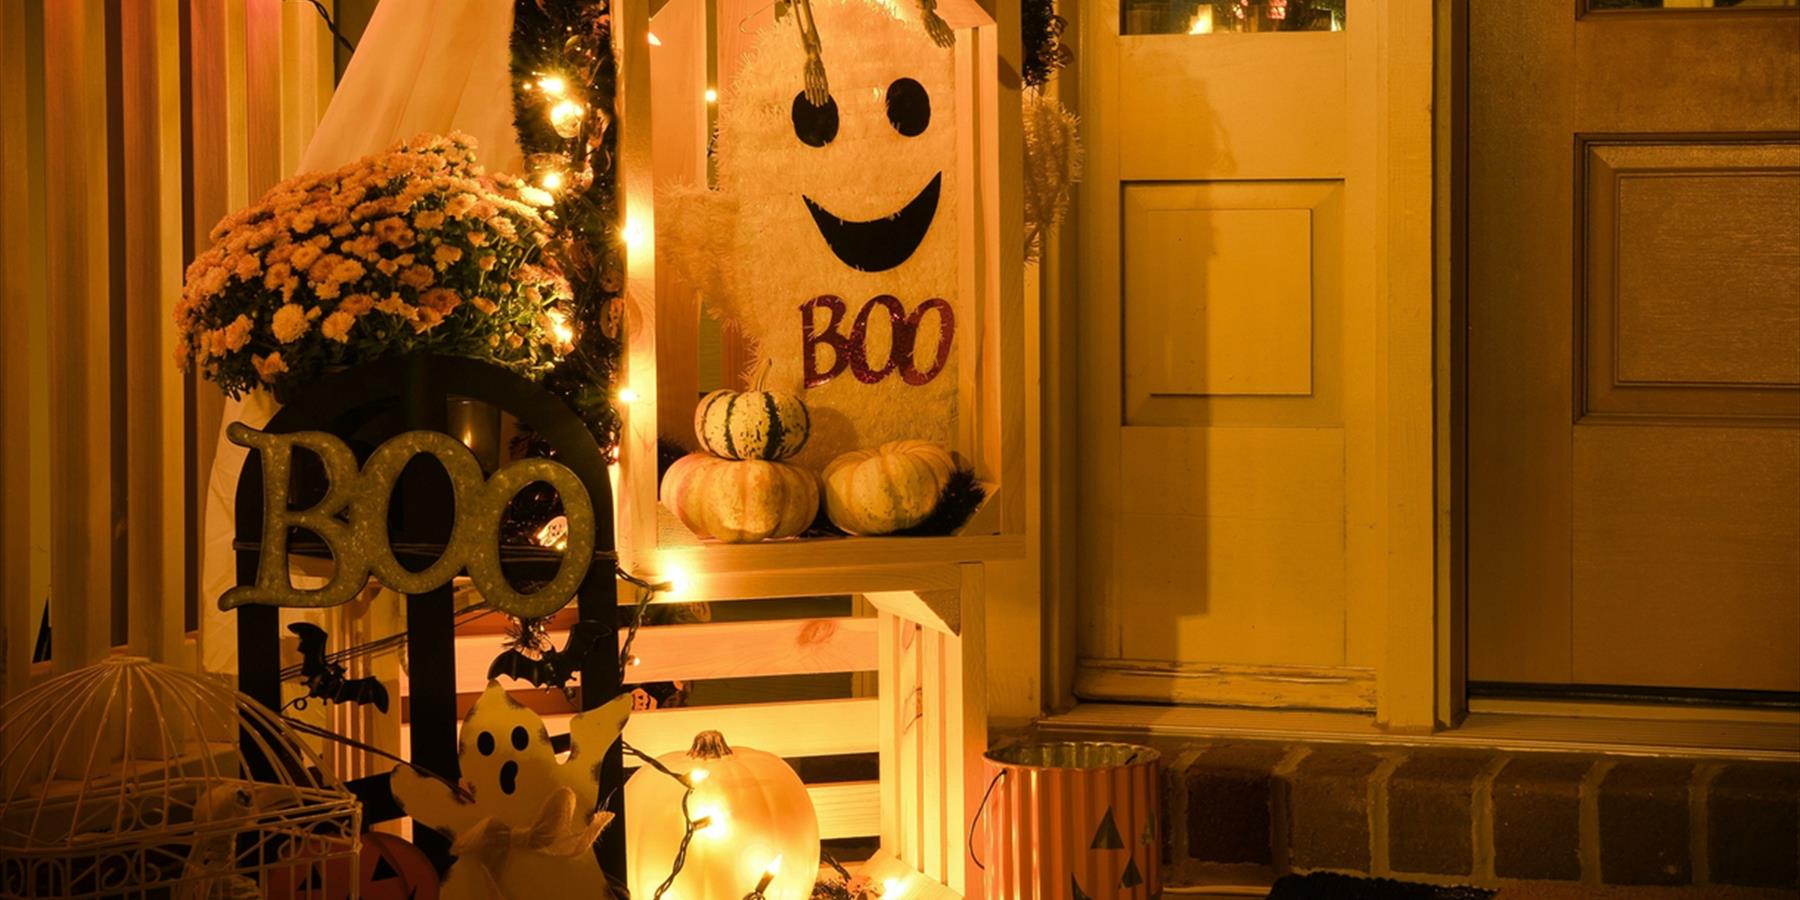 Small display of ghosts and white pumpkins with orange lights